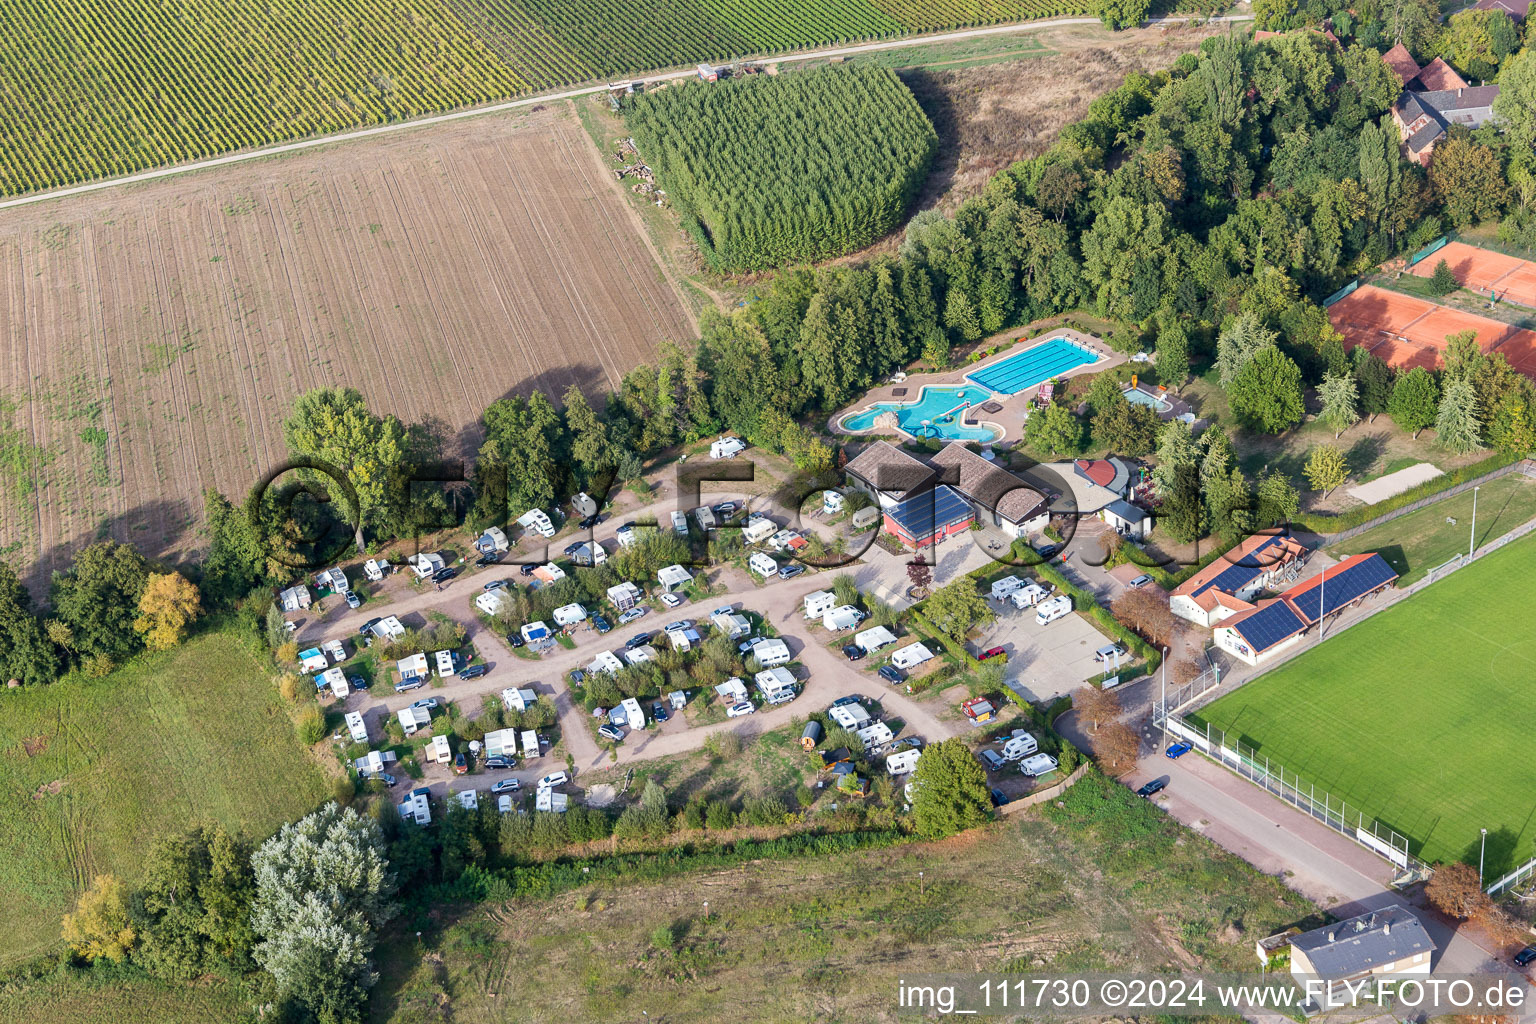 Aerial view of Outdoor swimming pool and campsite in the Klingbachtal in the district Klingen in Heuchelheim-Klingen in the state Rhineland-Palatinate, Germany